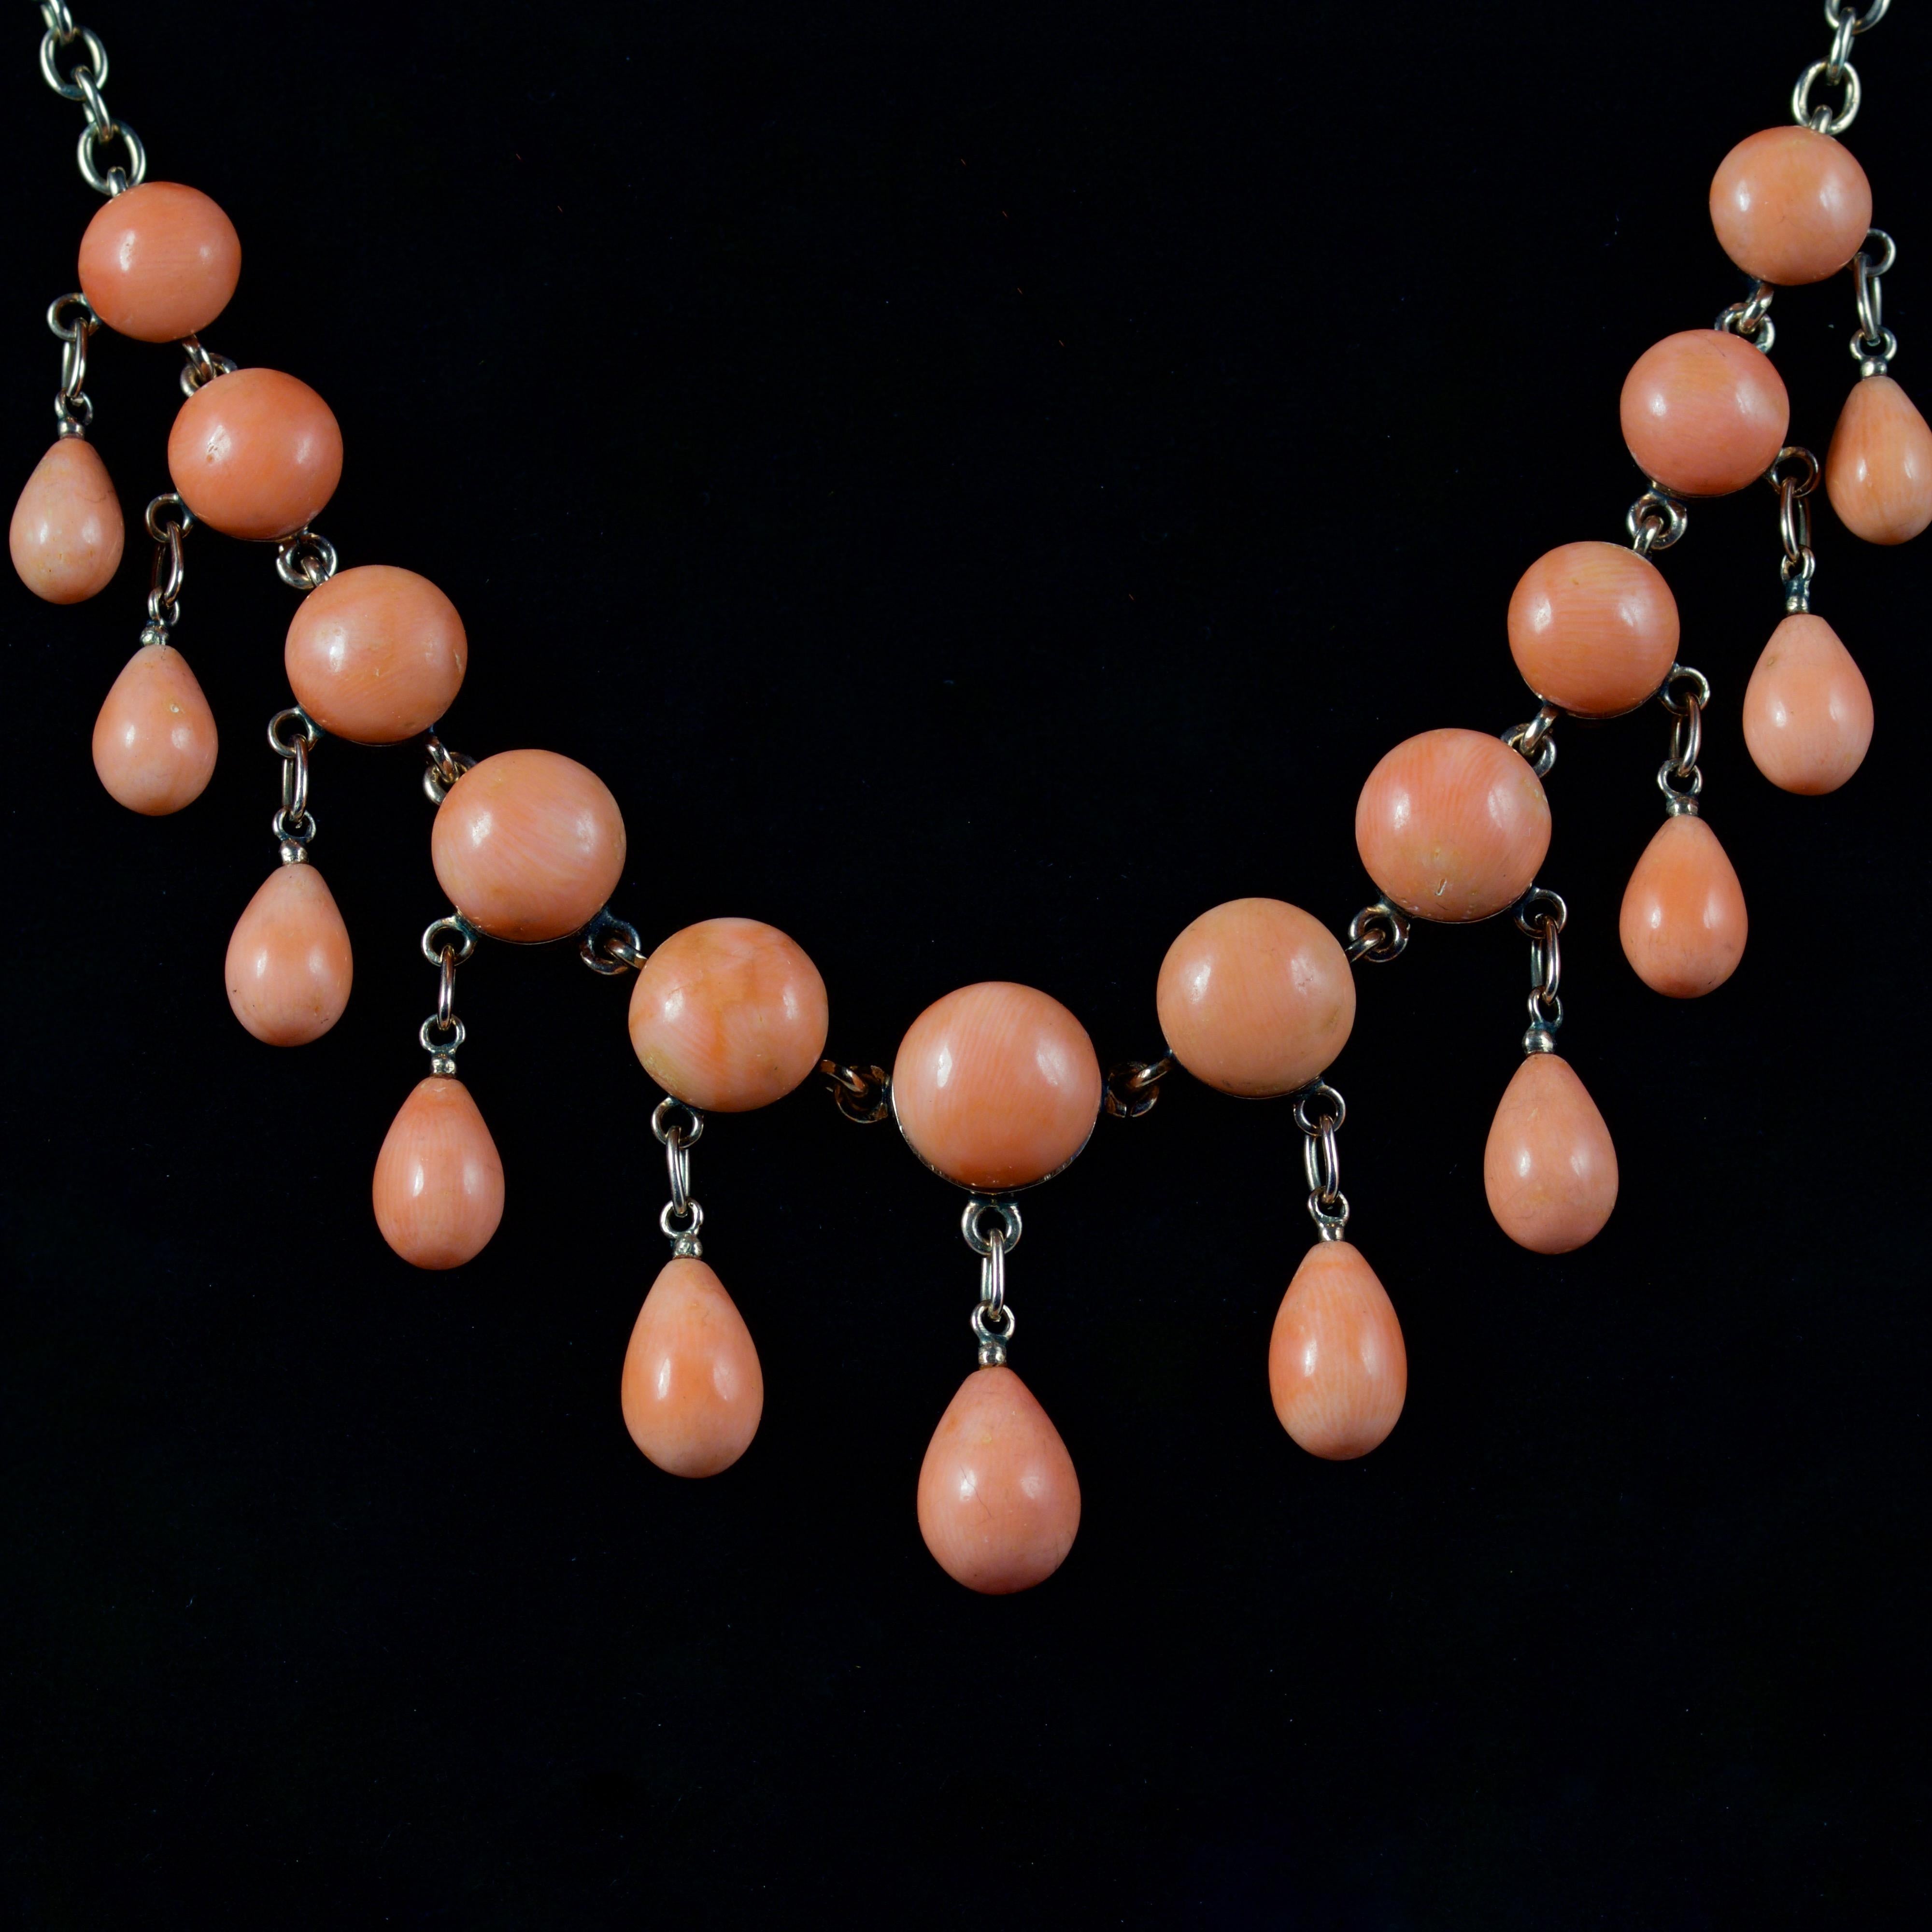 This wonderful Victorian Coral fringe necklace is, Circa 1880

The necklace boasts beautiful Corals set on a rolled Gold chain.

The largest Coral is 3.5ct and the smallest is 2ct, with smaller teardrop shaped Corals hanging beautifully from the